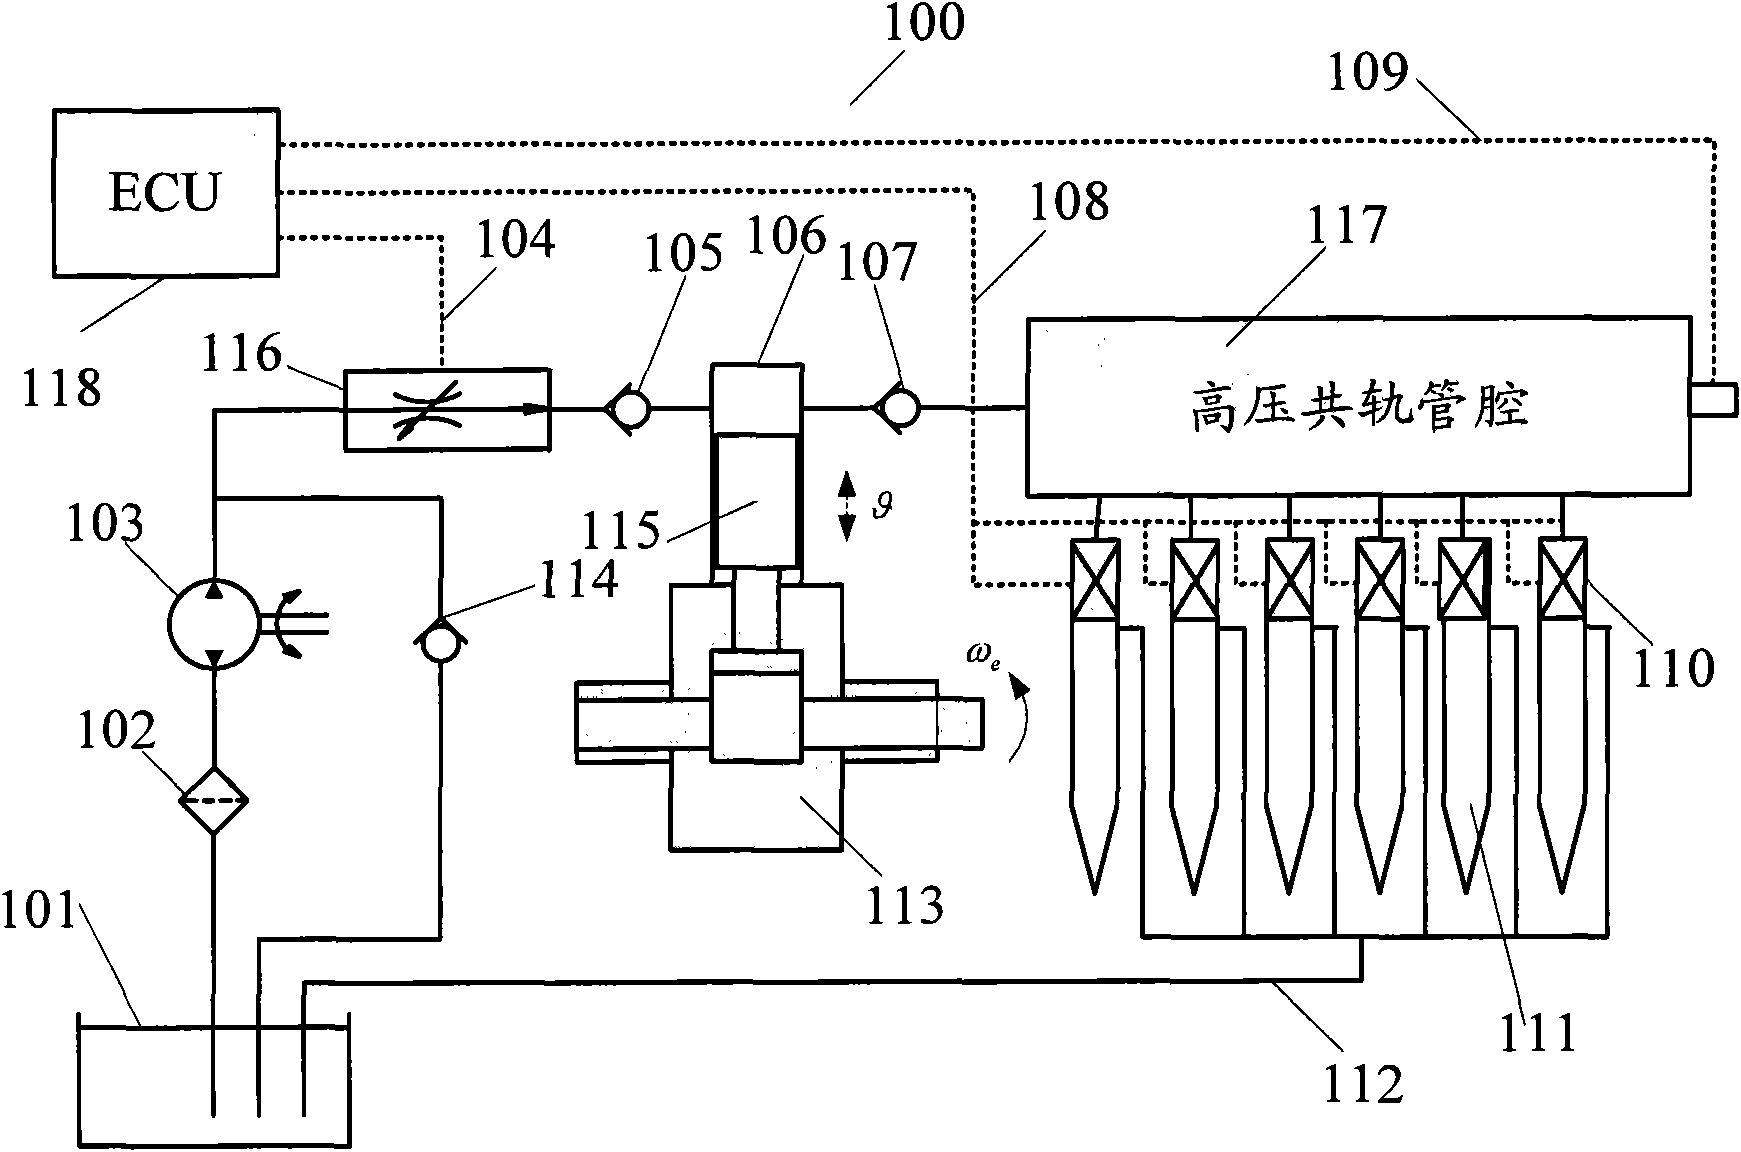 Equipment and method for controlling rail pressure of high-pressure rail-shared pipe cavity for high-pressure rail-shared fuel system